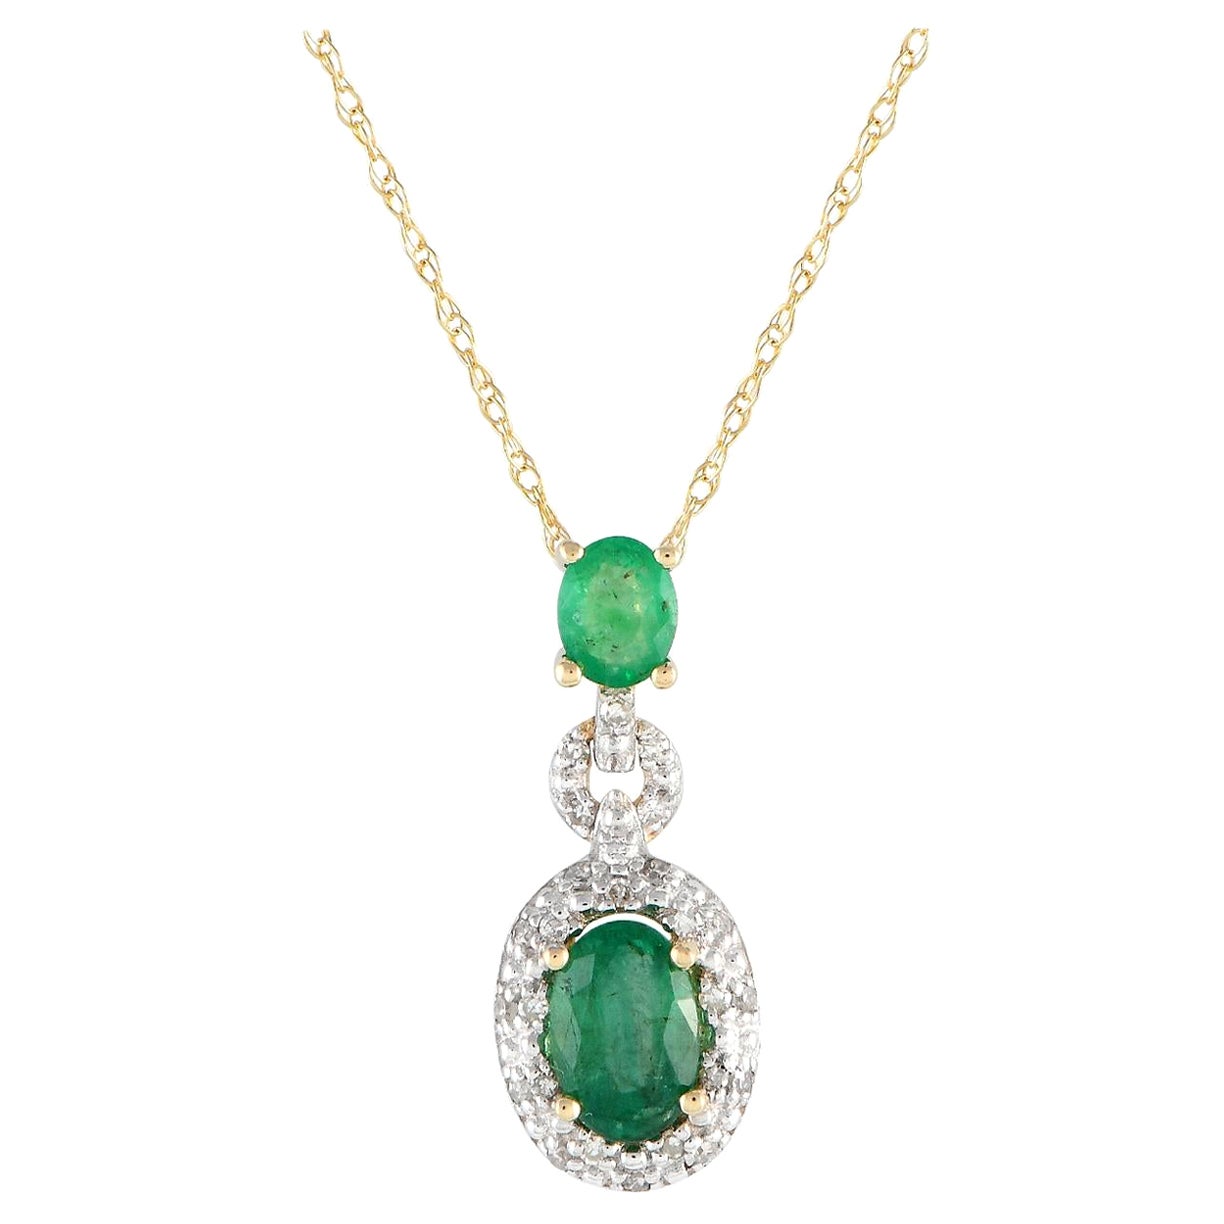 LB Exclusive 14K Yellow Gold 0.08ct Diamond and Emerald Necklace PD4-16183YEM For Sale